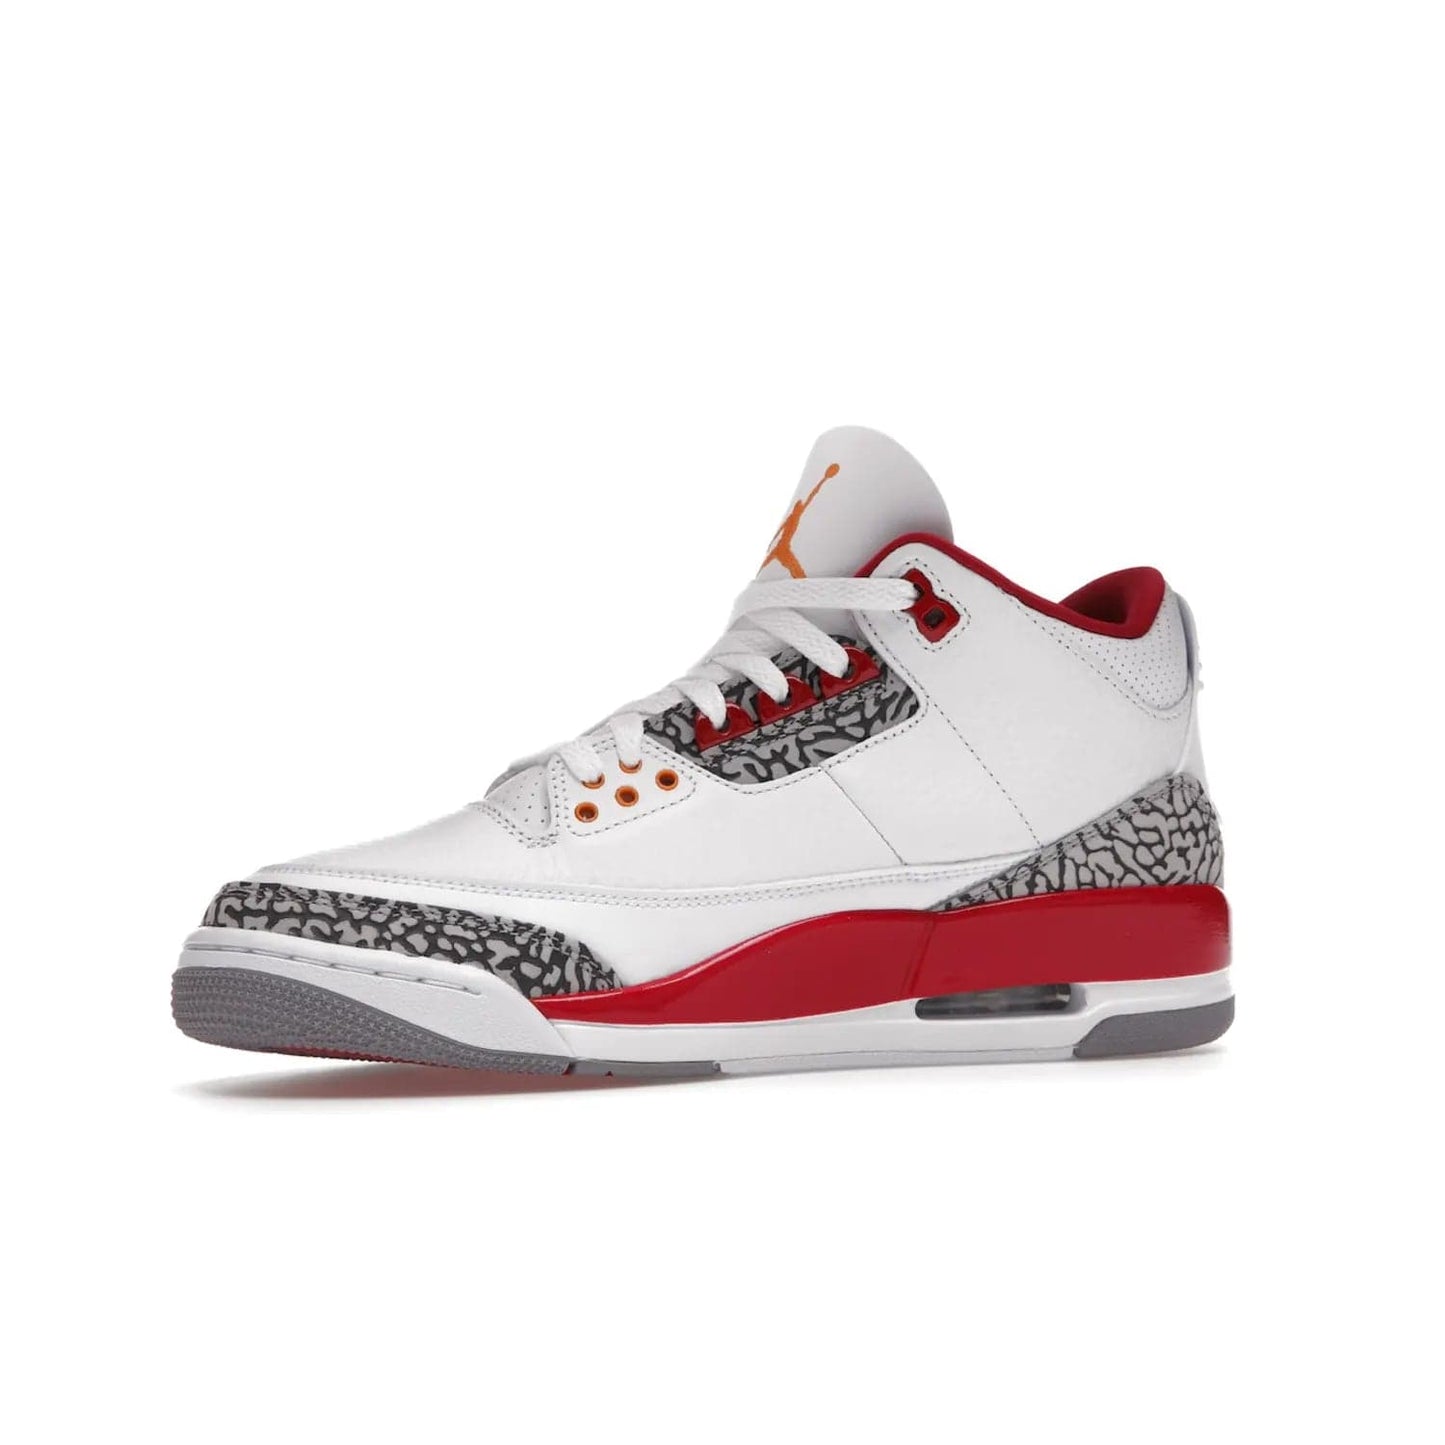 Jordan 3 Retro Cardinal Red - Image 17 - Only at www.BallersClubKickz.com - Air Jordan 3 Retro Cardinal Red combines classic style and modern appeal - white tumbled leather, signature Elephant Print overlays, cardinal red midsoles, Jumpman logo embroidery. Available Feb 2022.